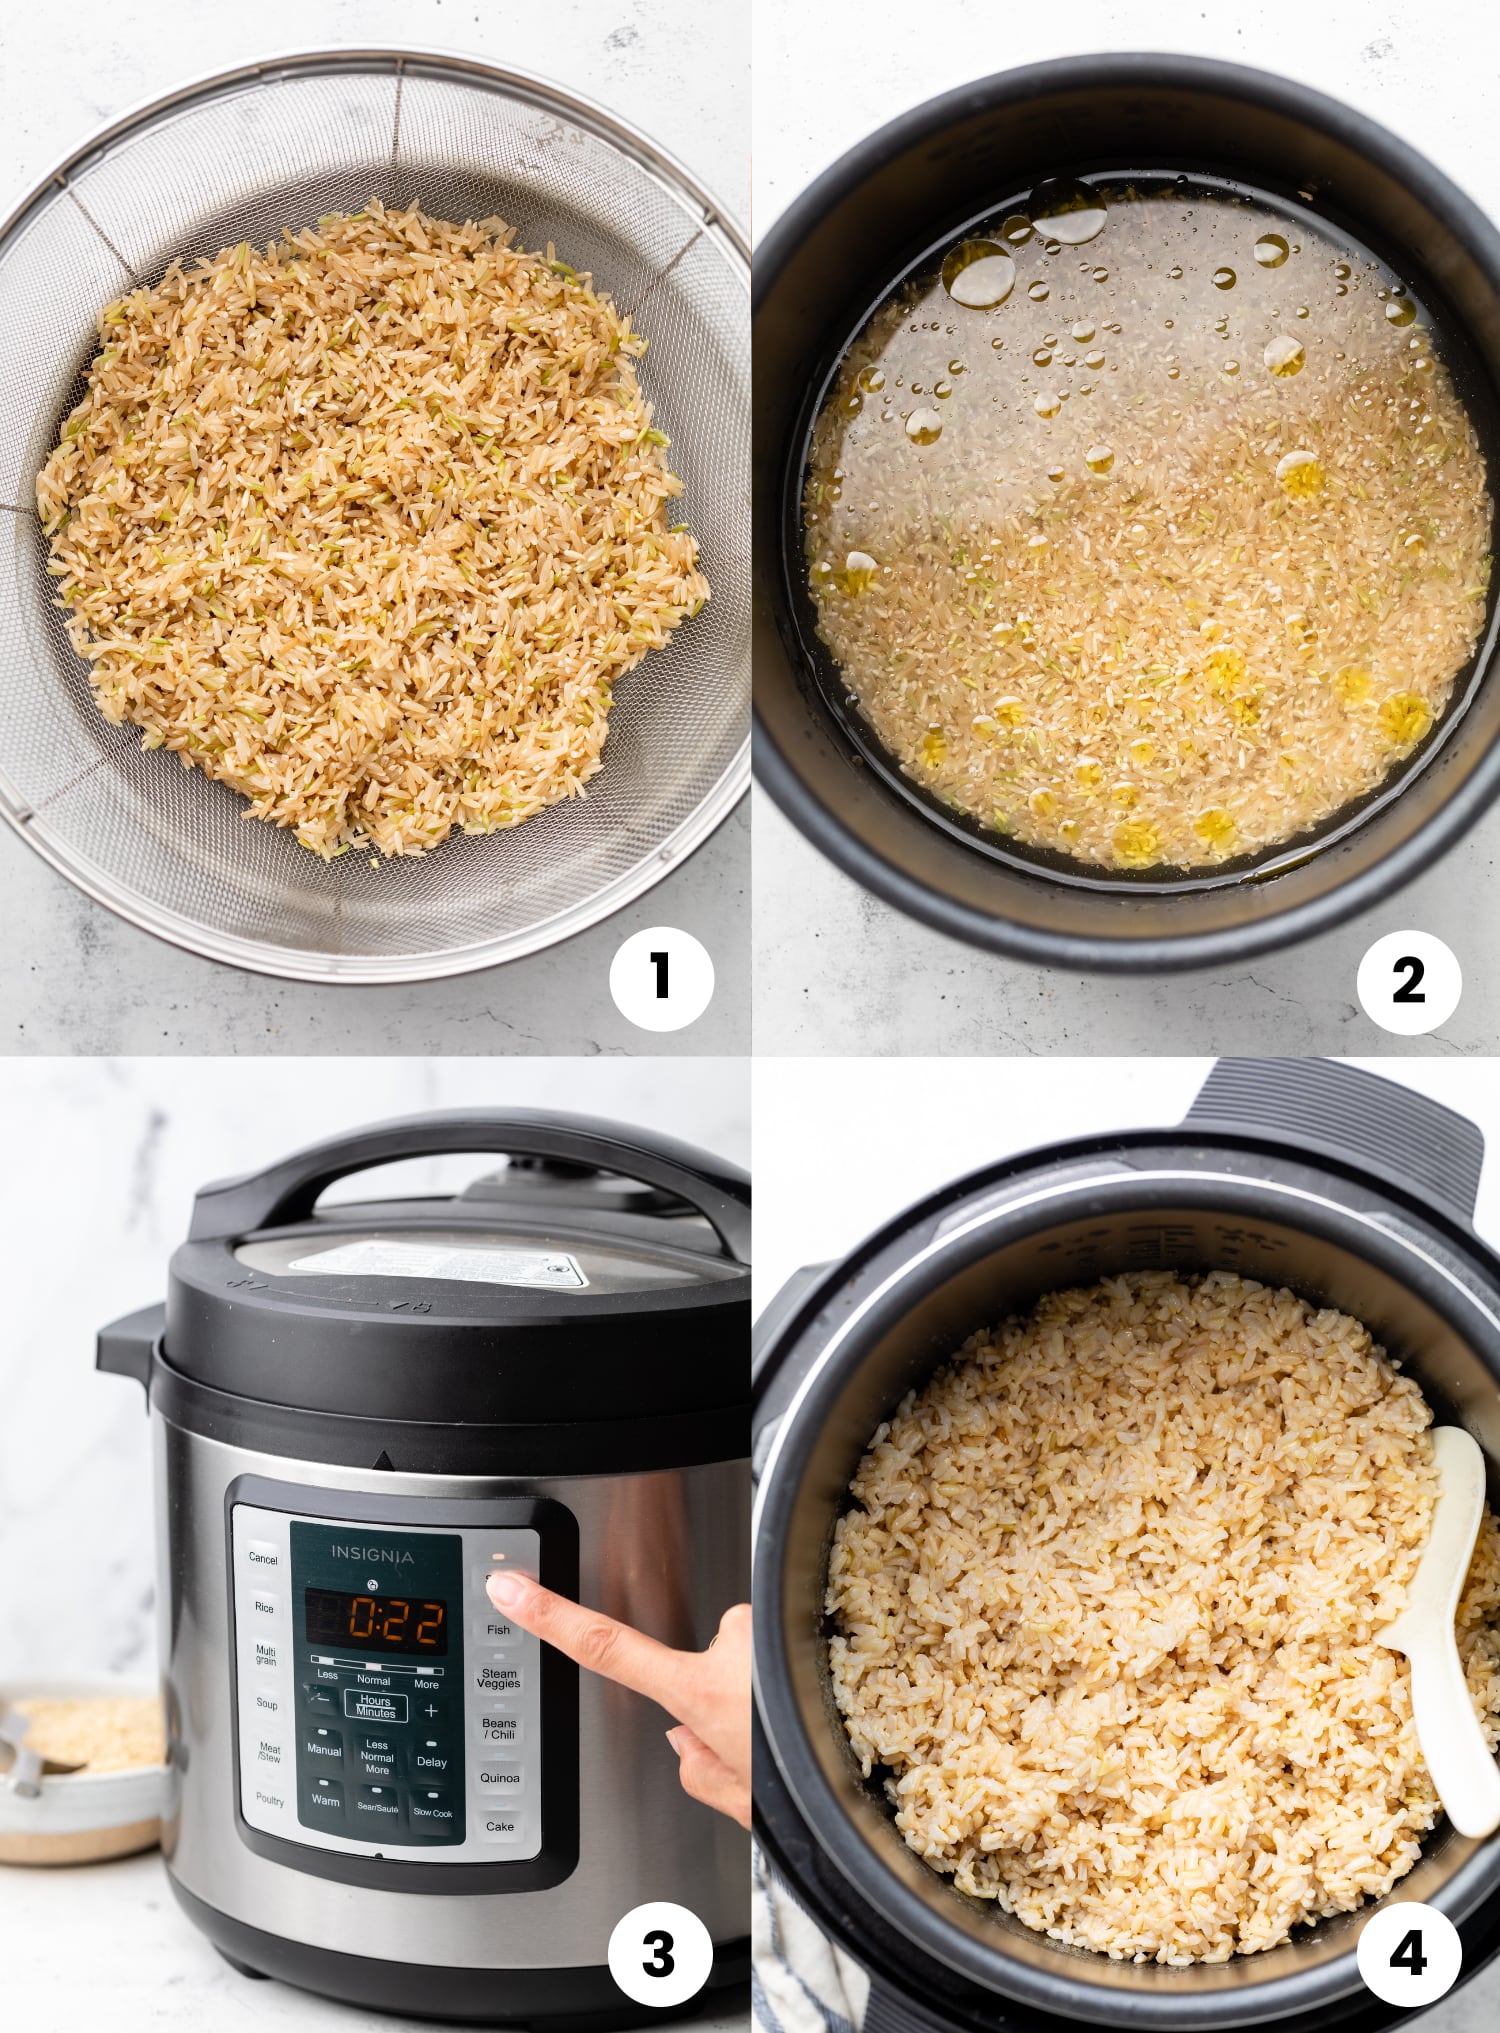 Steps for how to make the recipe, including rinsing the rice, cooking it in the instant pot, and fluffing the rice.